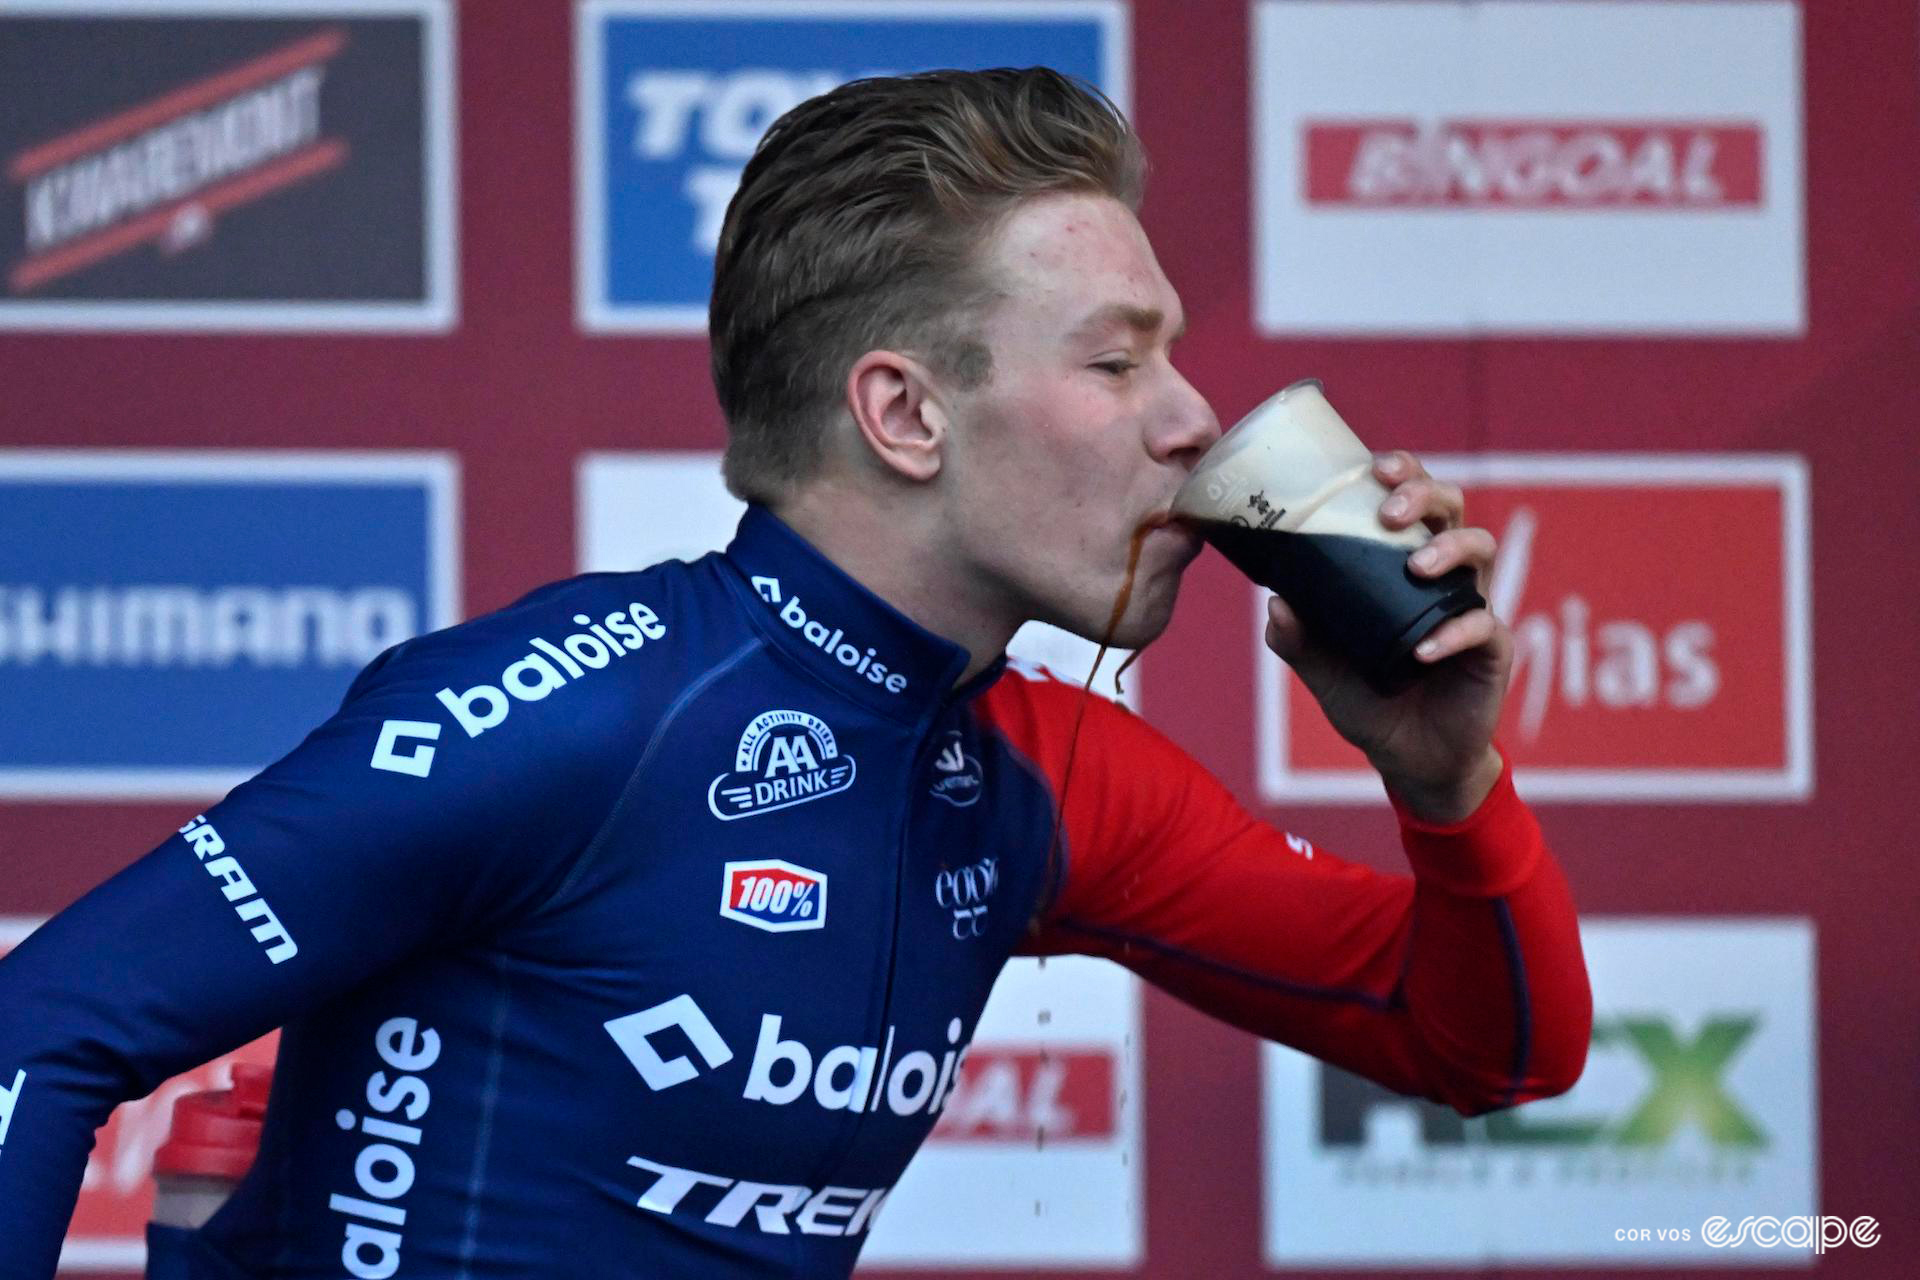 Pim Ronhaar, cleaned and changed out of his muddy Baloise Trek Lions kit, spills some Guinness as he smiles through a celebratory pint on the podium after winning CX World Cup Dublin.